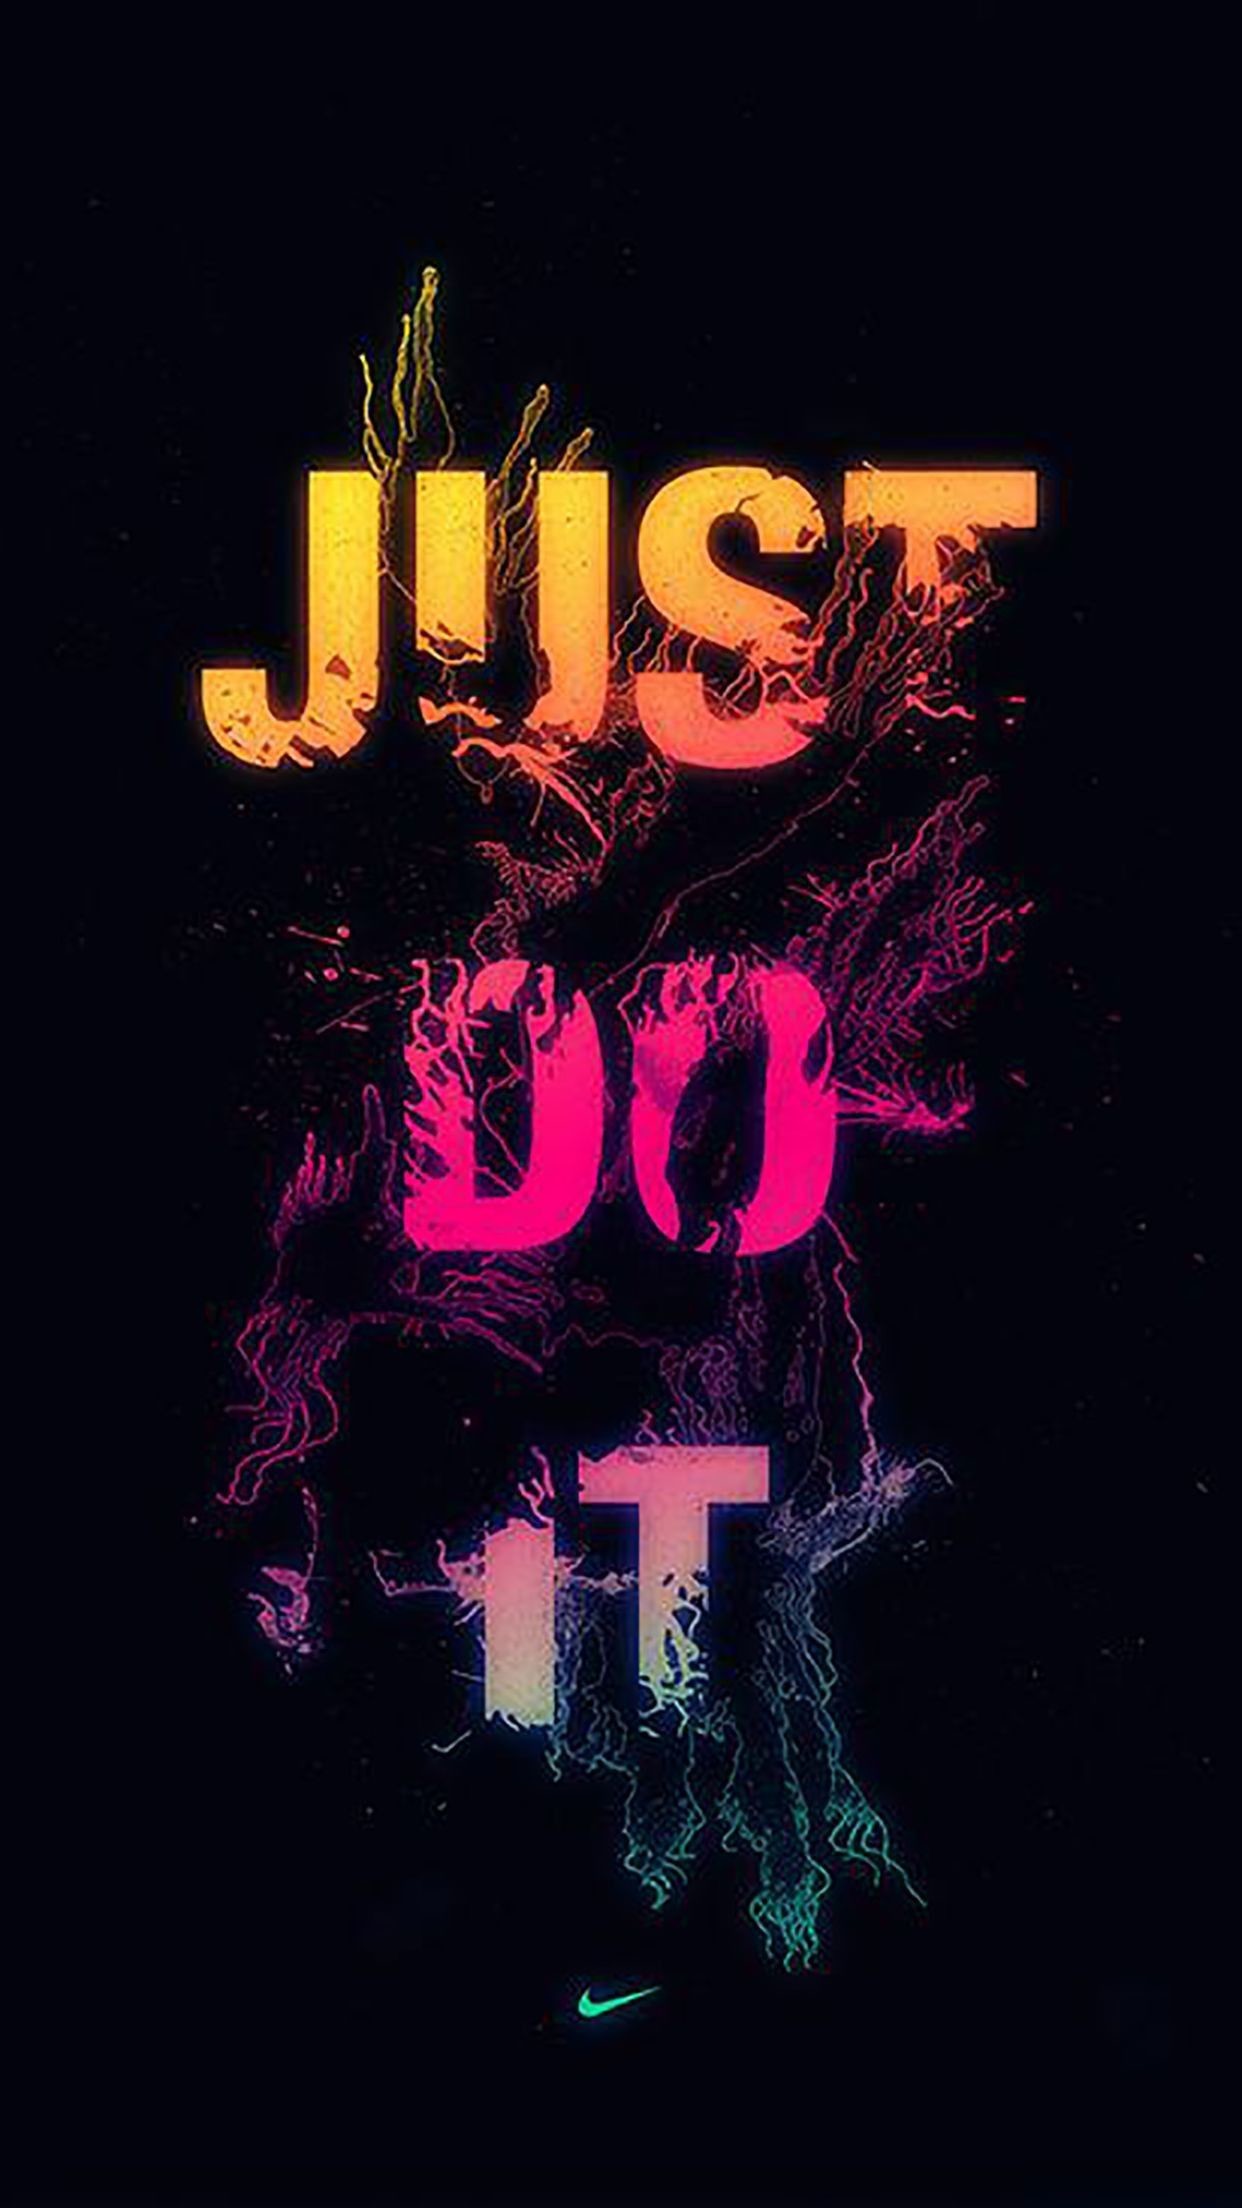 1242x2208 Inspirational Wallpapers Hd, Just Do It Wallpapers, Cute Wallpapers, Nike  Wallpaper Iphone,